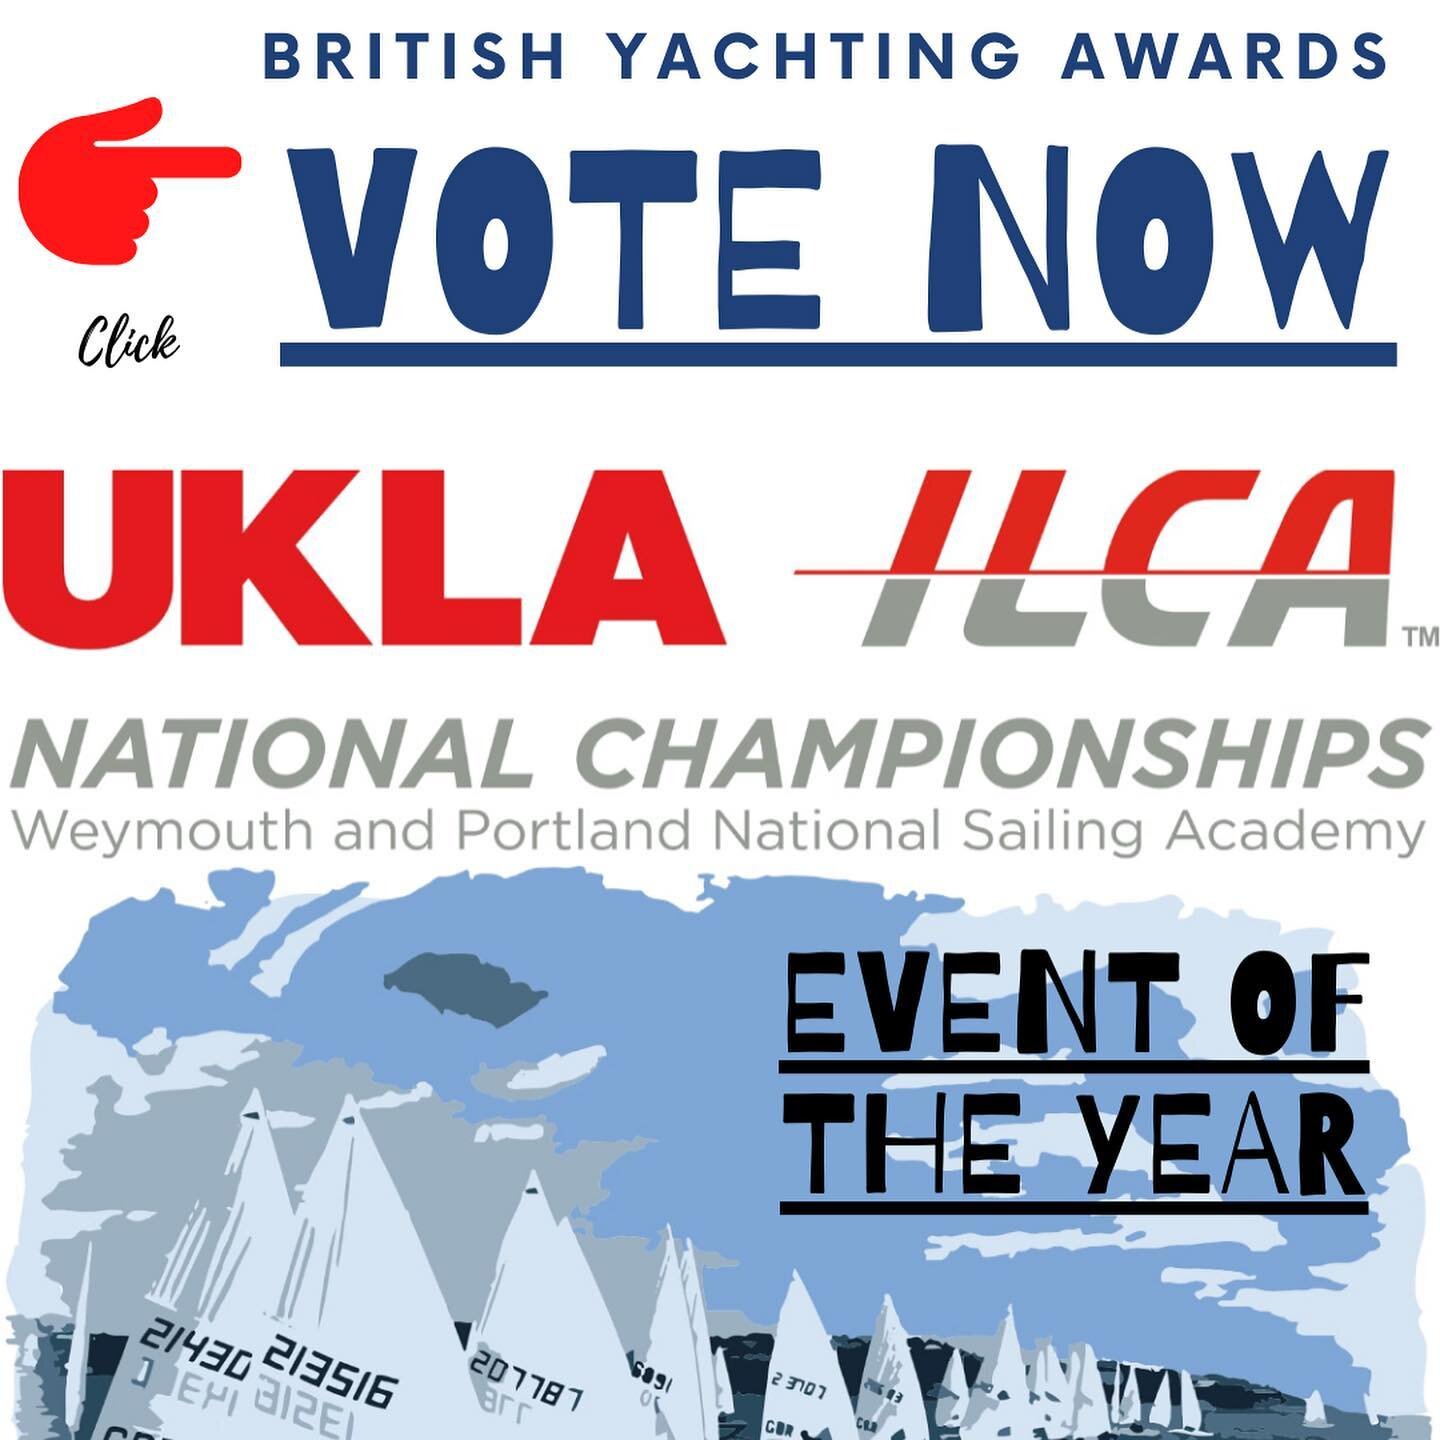 Only few hours left to cast your vote at British Yachting Awards 2020! Click though to vote for the UKLA National Championships as Event of the Year!
Vote now
👇🏼👇🏼👇🏼
https://www.britishyachtingawards.com/vote-now/